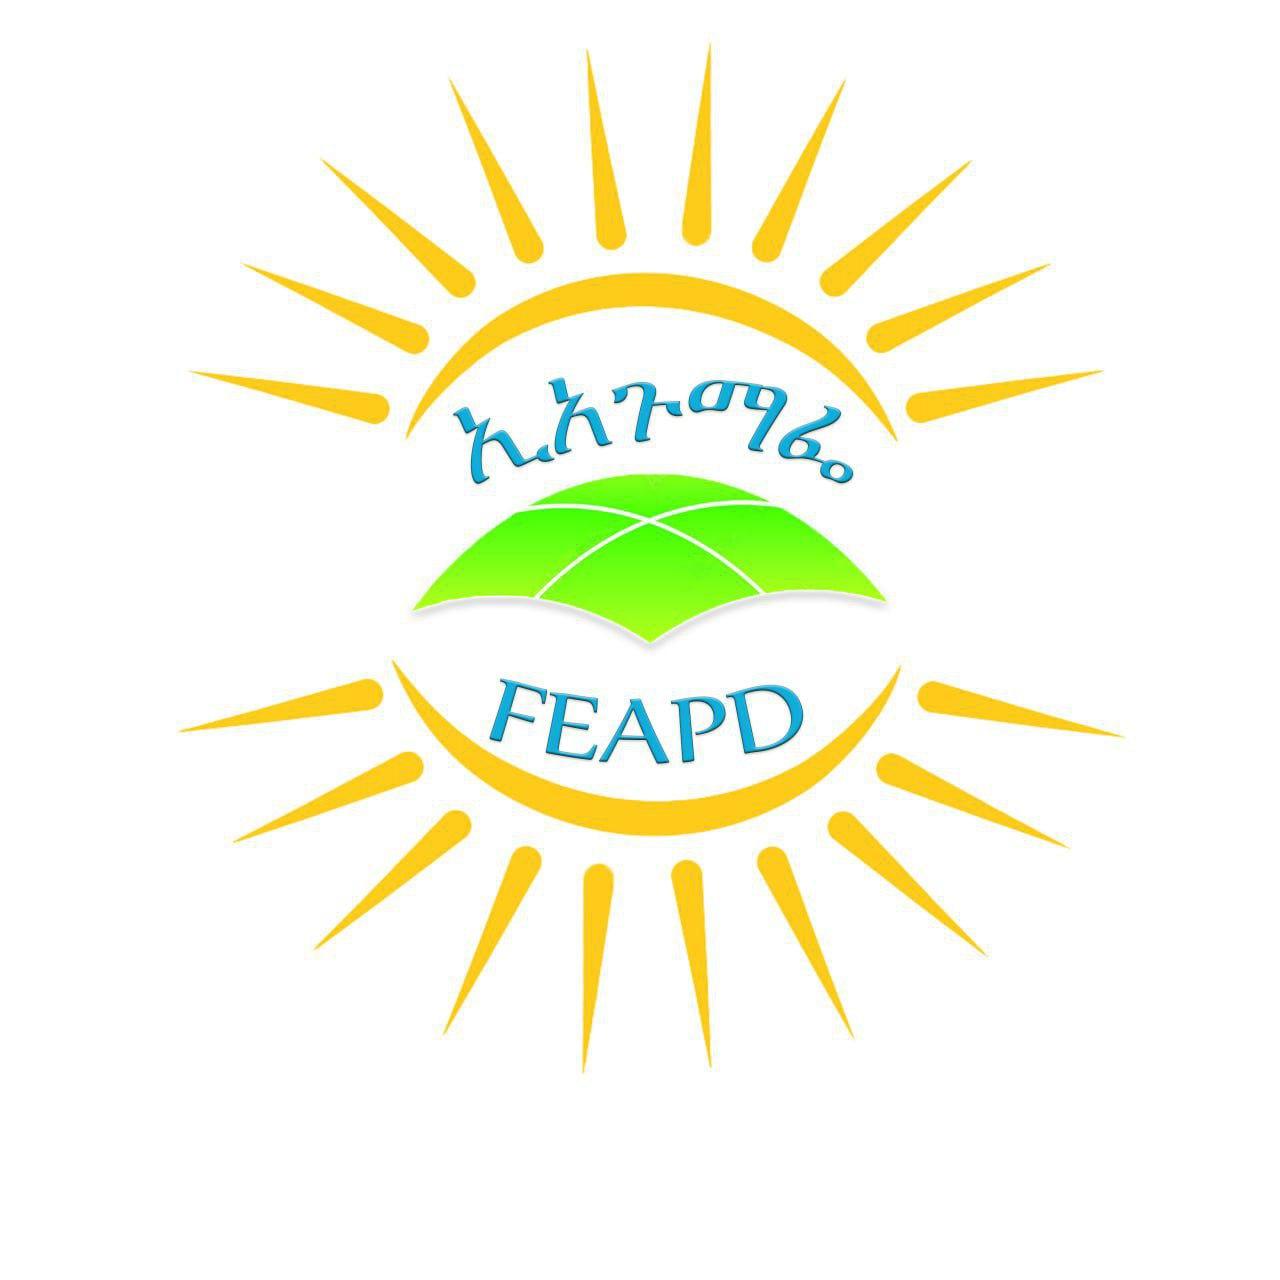 The Federation of Ethiopian Associations of Persons with Disabilities (FEAPD)  logo